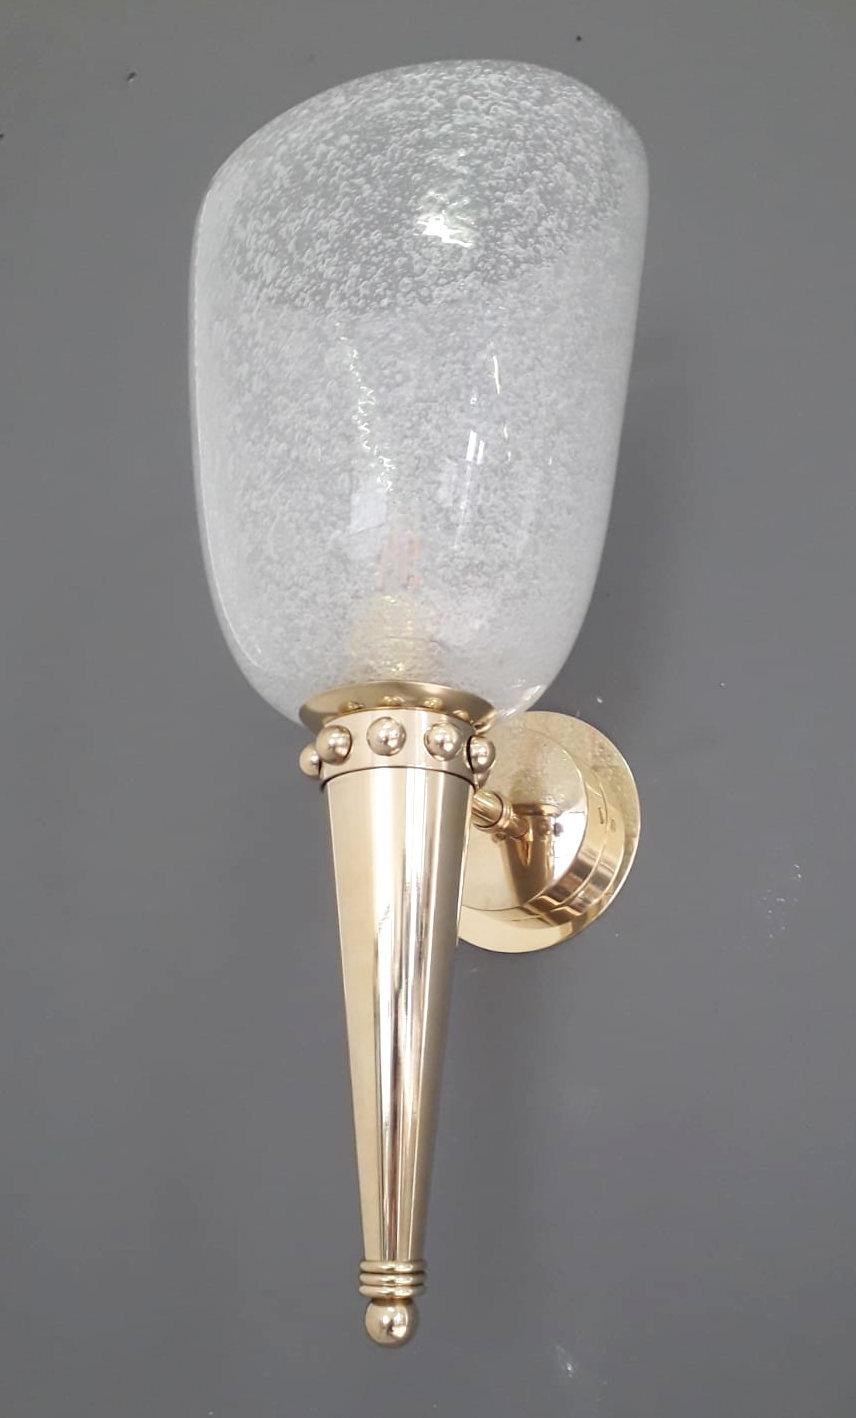 Vintage Italian torchere wall lights with Murano glass cups hand blown with bubbles inside the glass using bollicine technique, mounted on brass frames, made in Italy by Barovier et Toso, circa 1950s
Original mark on the backplate
Measures: Height